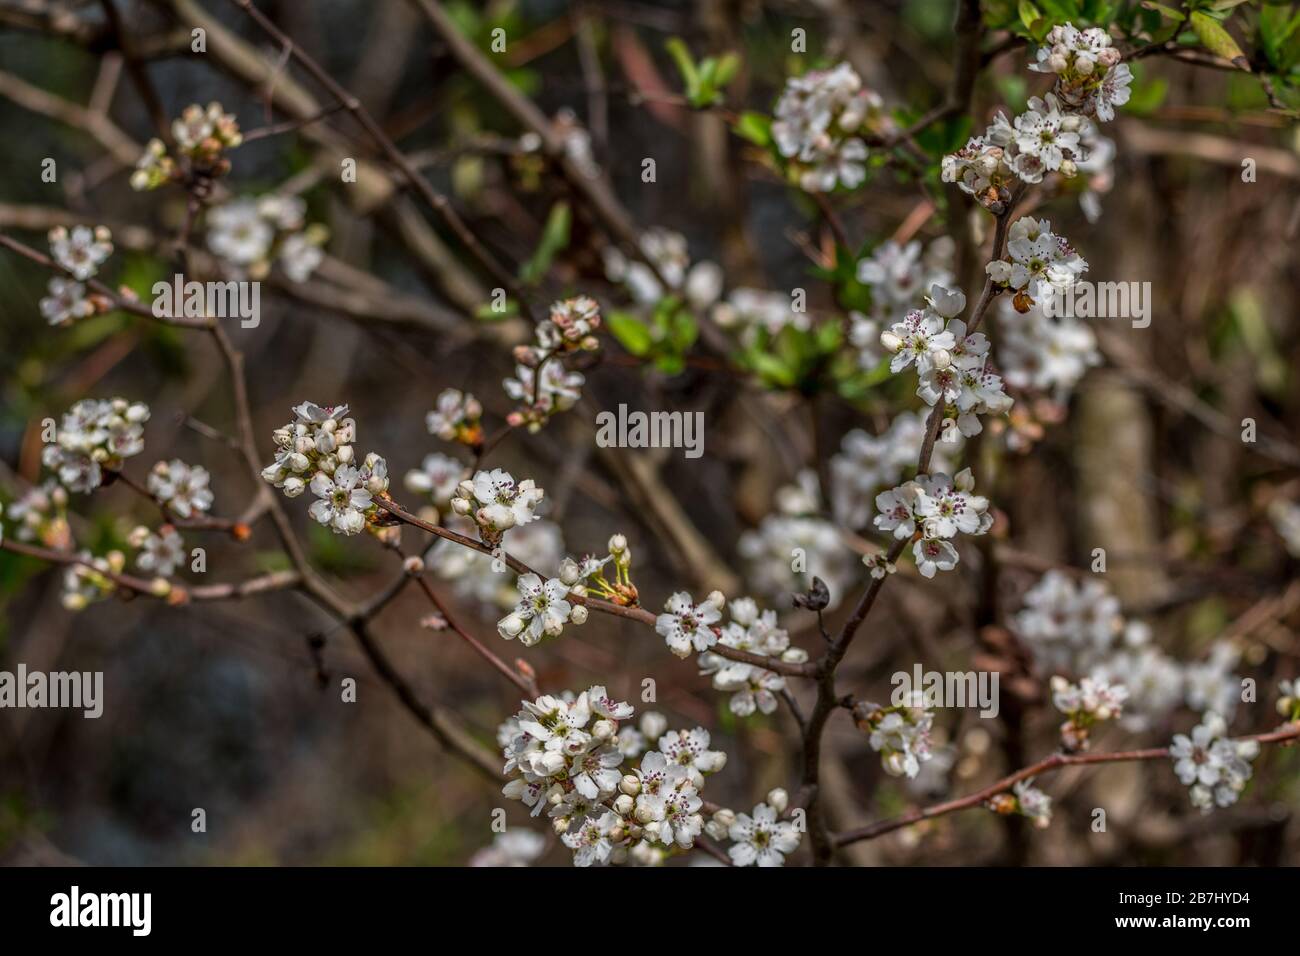 Bright white flowering blossoms clustered together on tree branches in the woodlands on a sunny day in early spring Stock Photo